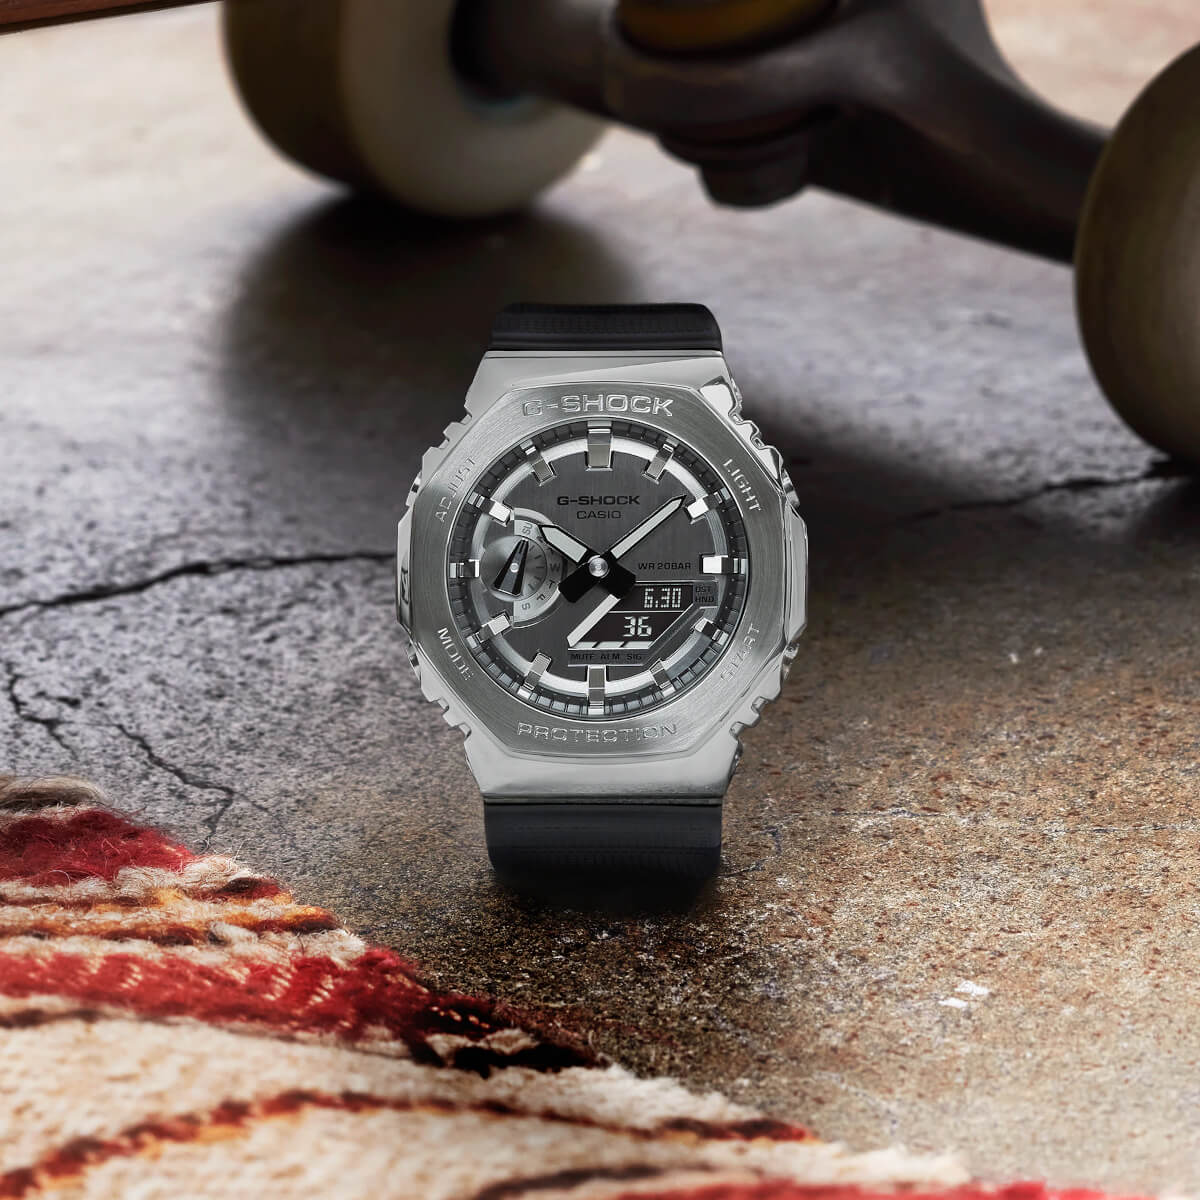 How to buy the GM2100-1A and other new G-Shock watches